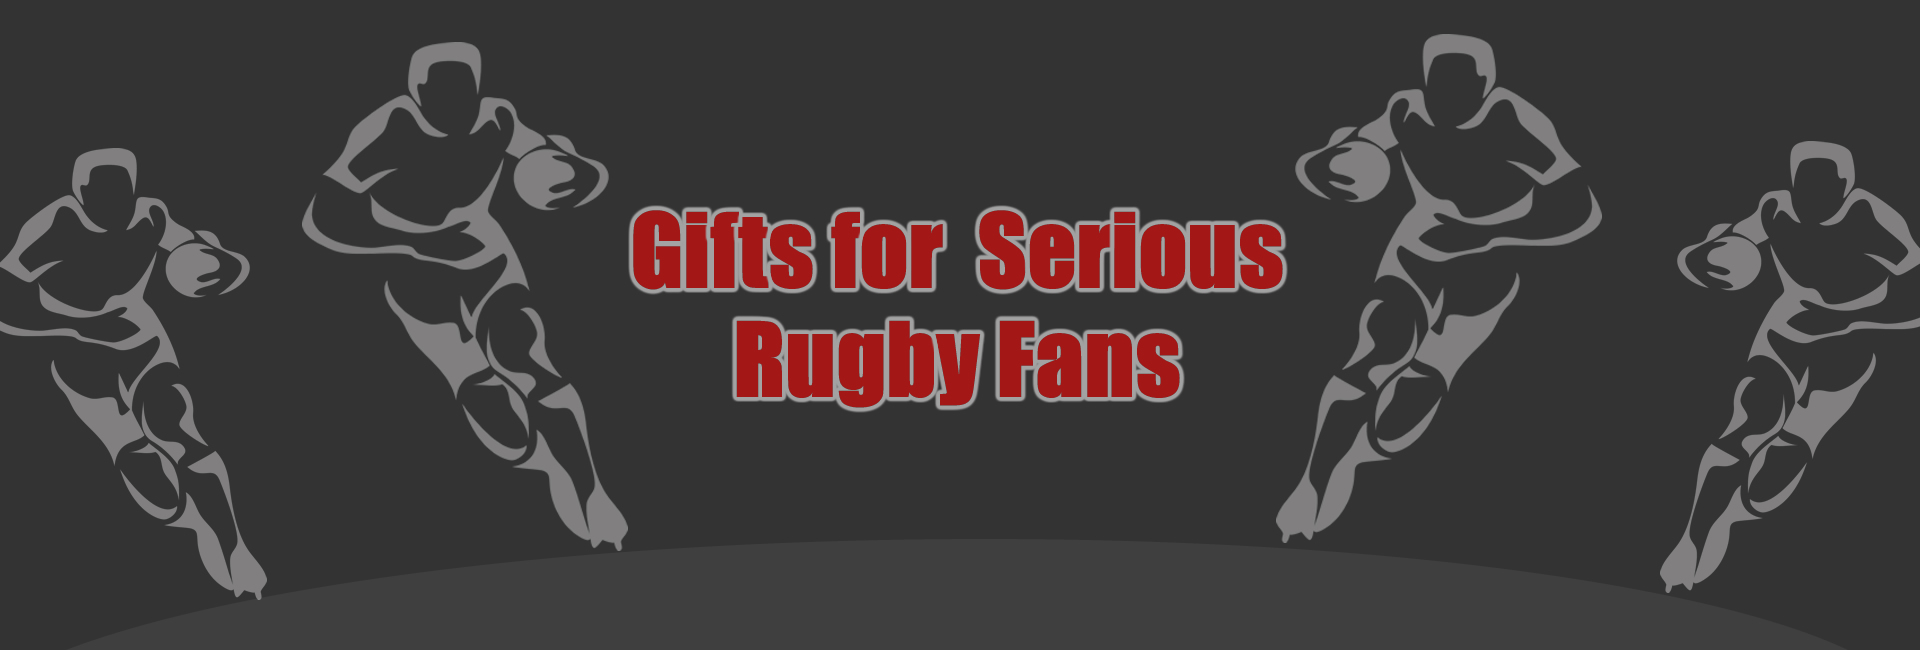 Rugby Gifts